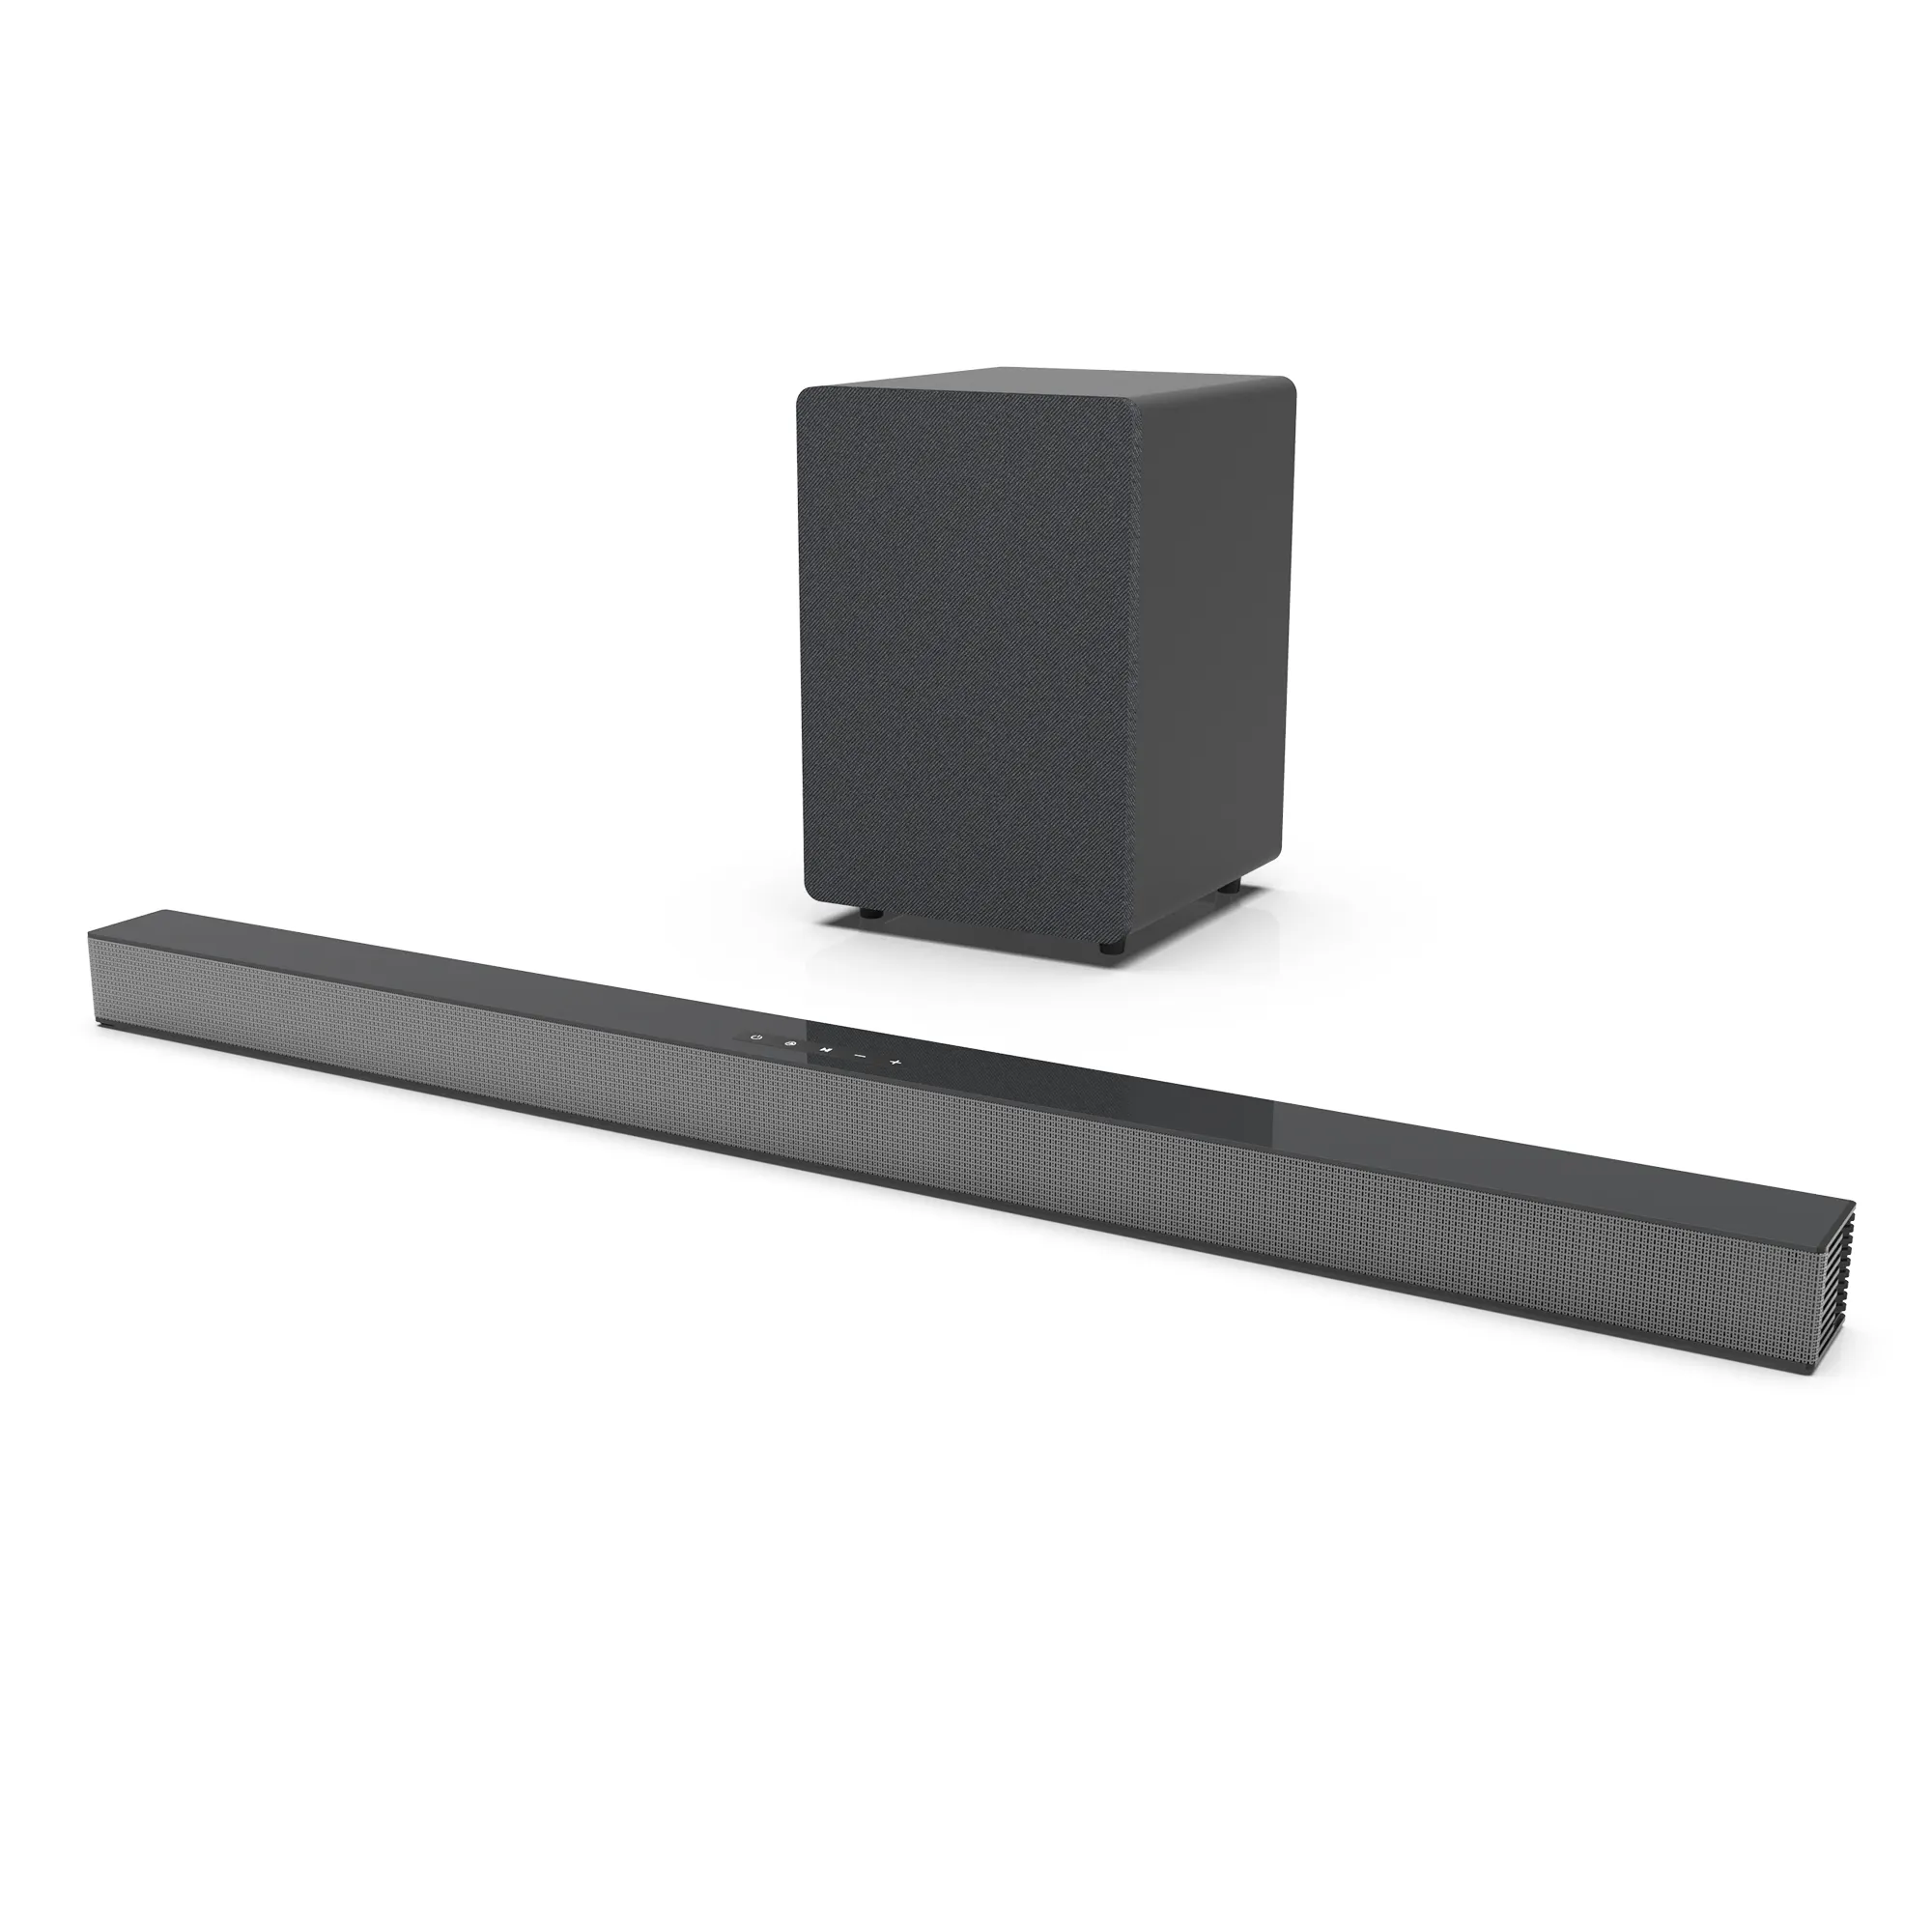 Audio Signa S2 Ultra-Slim TV Sound Bar, Works with 4K & HD TVs, Wireless Subwoofer, Includes HDMI & OPT , Bluetooth , Black